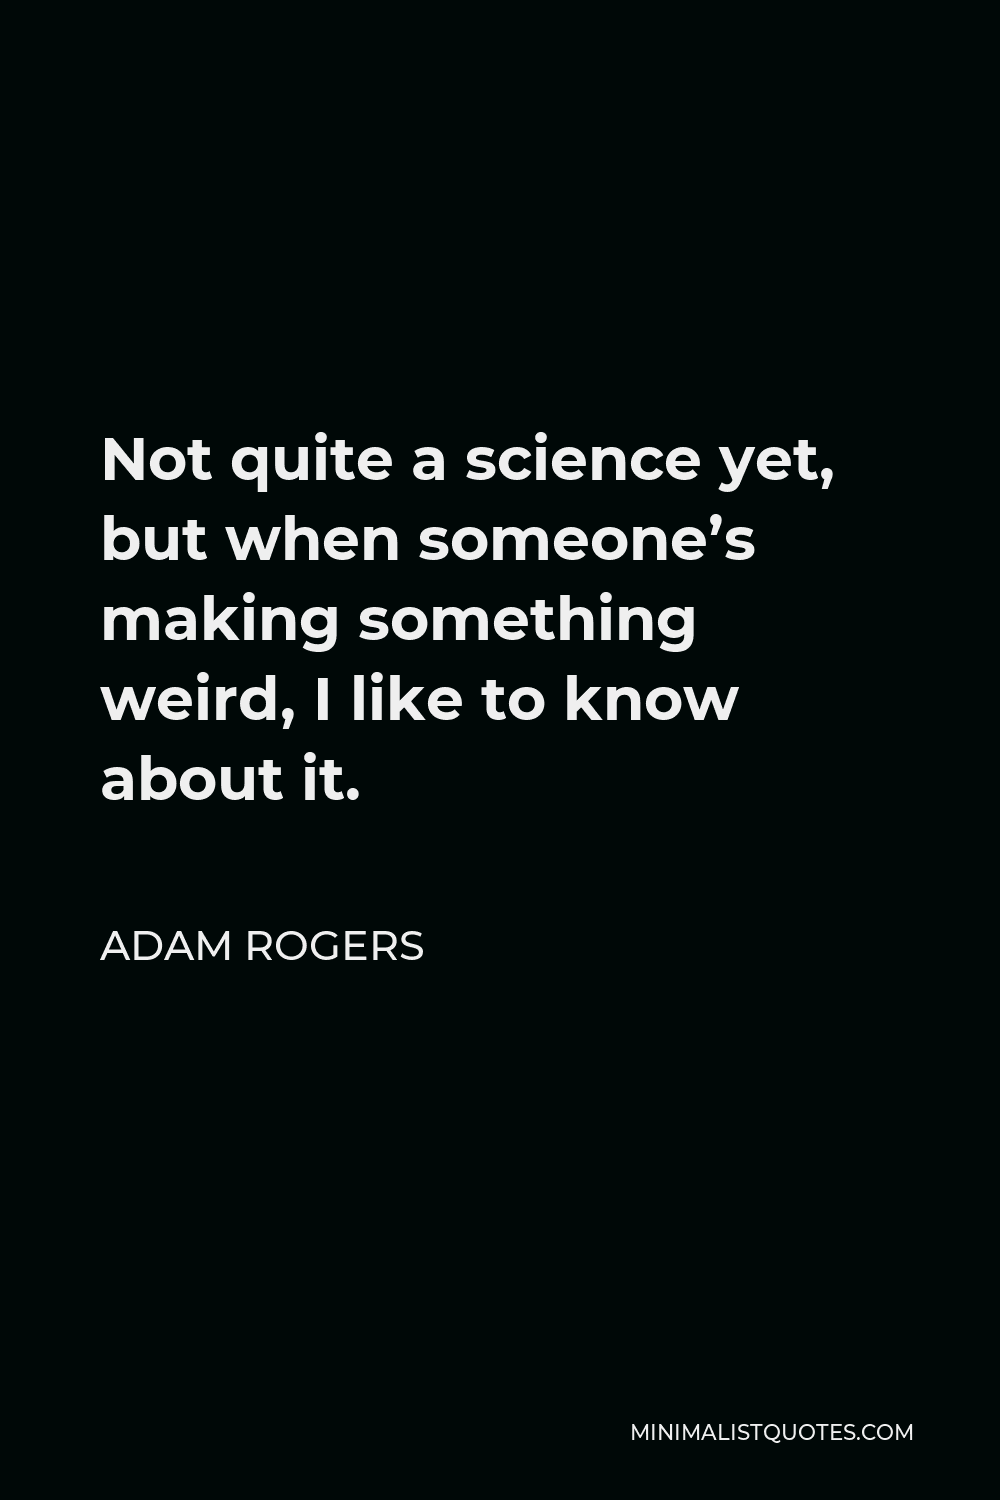 Adam Rogers Quote - Not quite a science yet, but when someone’s making something weird, I like to know about it.